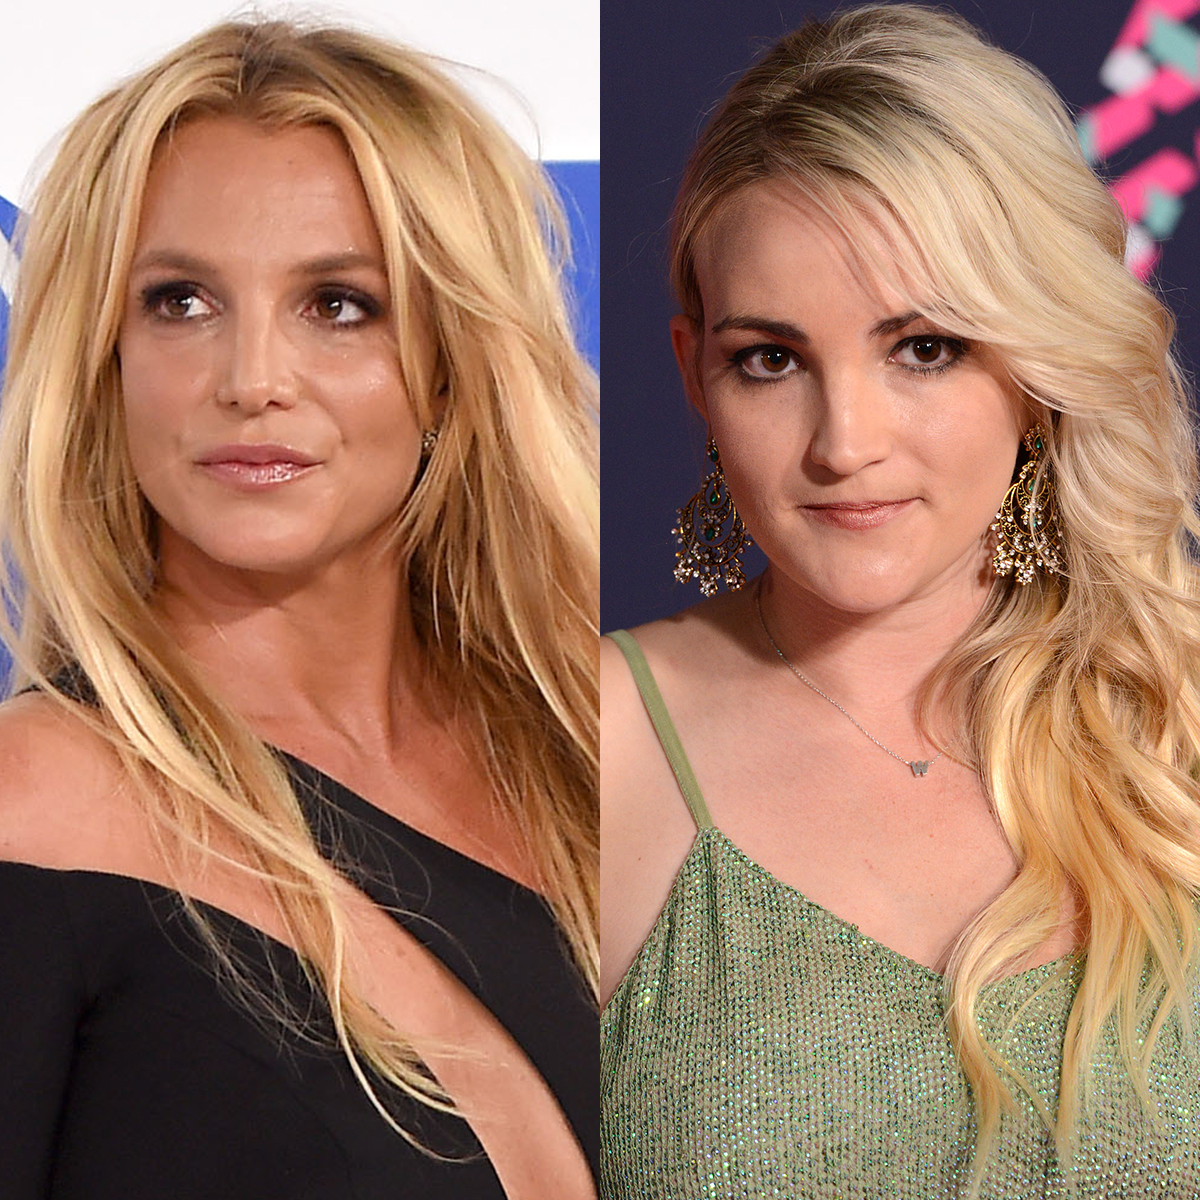 What's Really Going on Between Britney and Jamie Lynn Spears